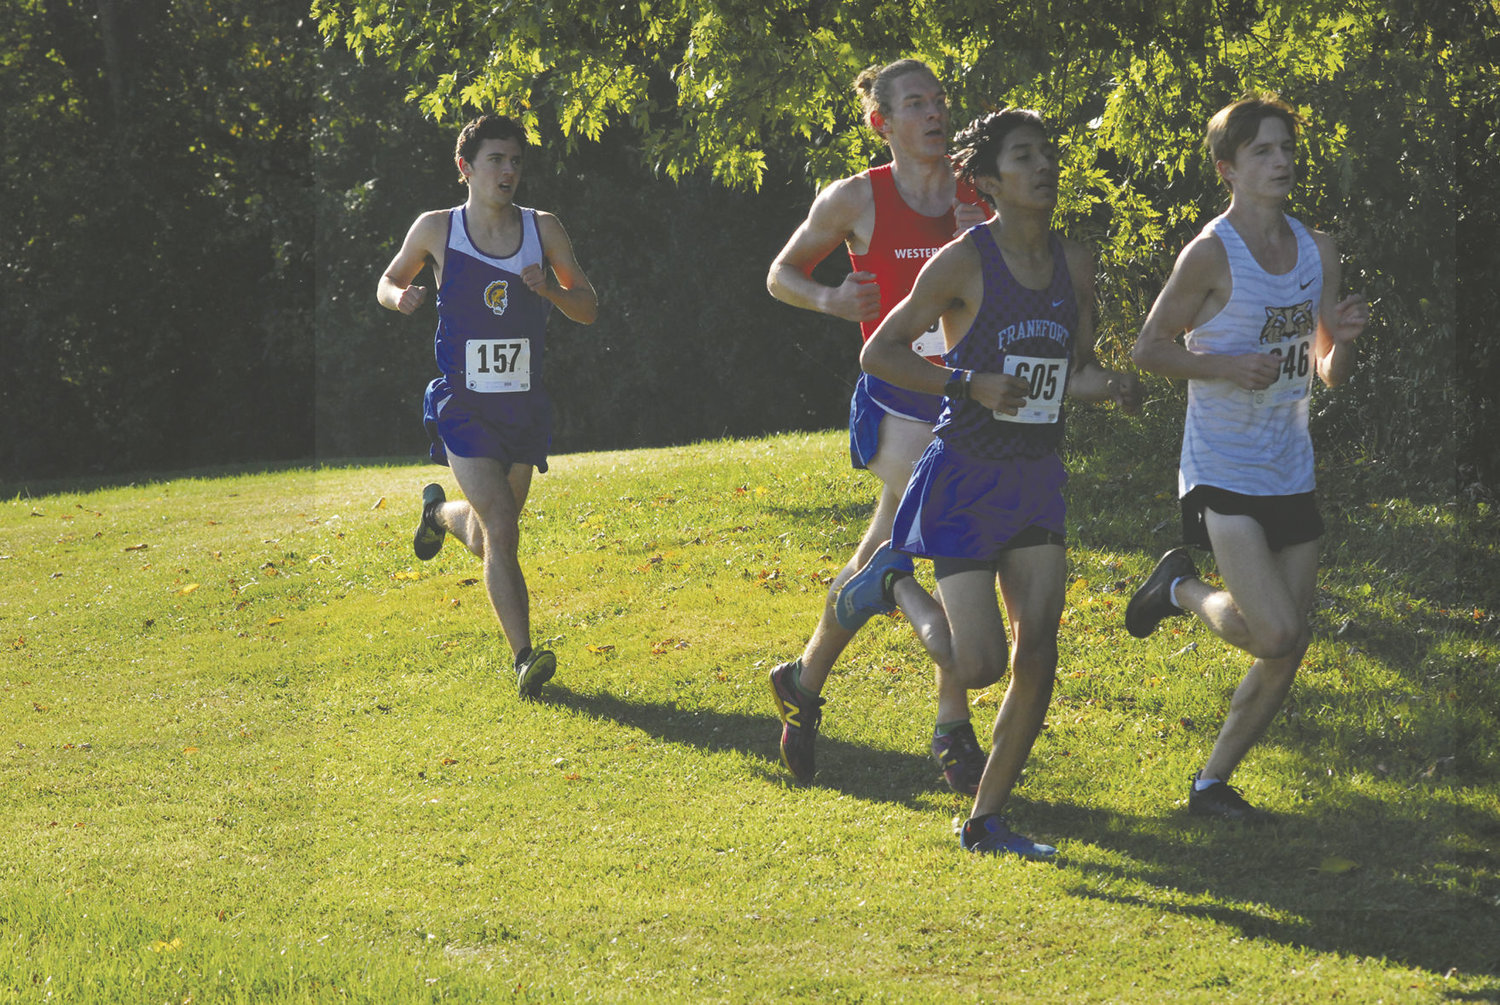 Crawfordsville's Drake Hayes stays with the front pack. Hayes finished 4th overall in the boys' race.